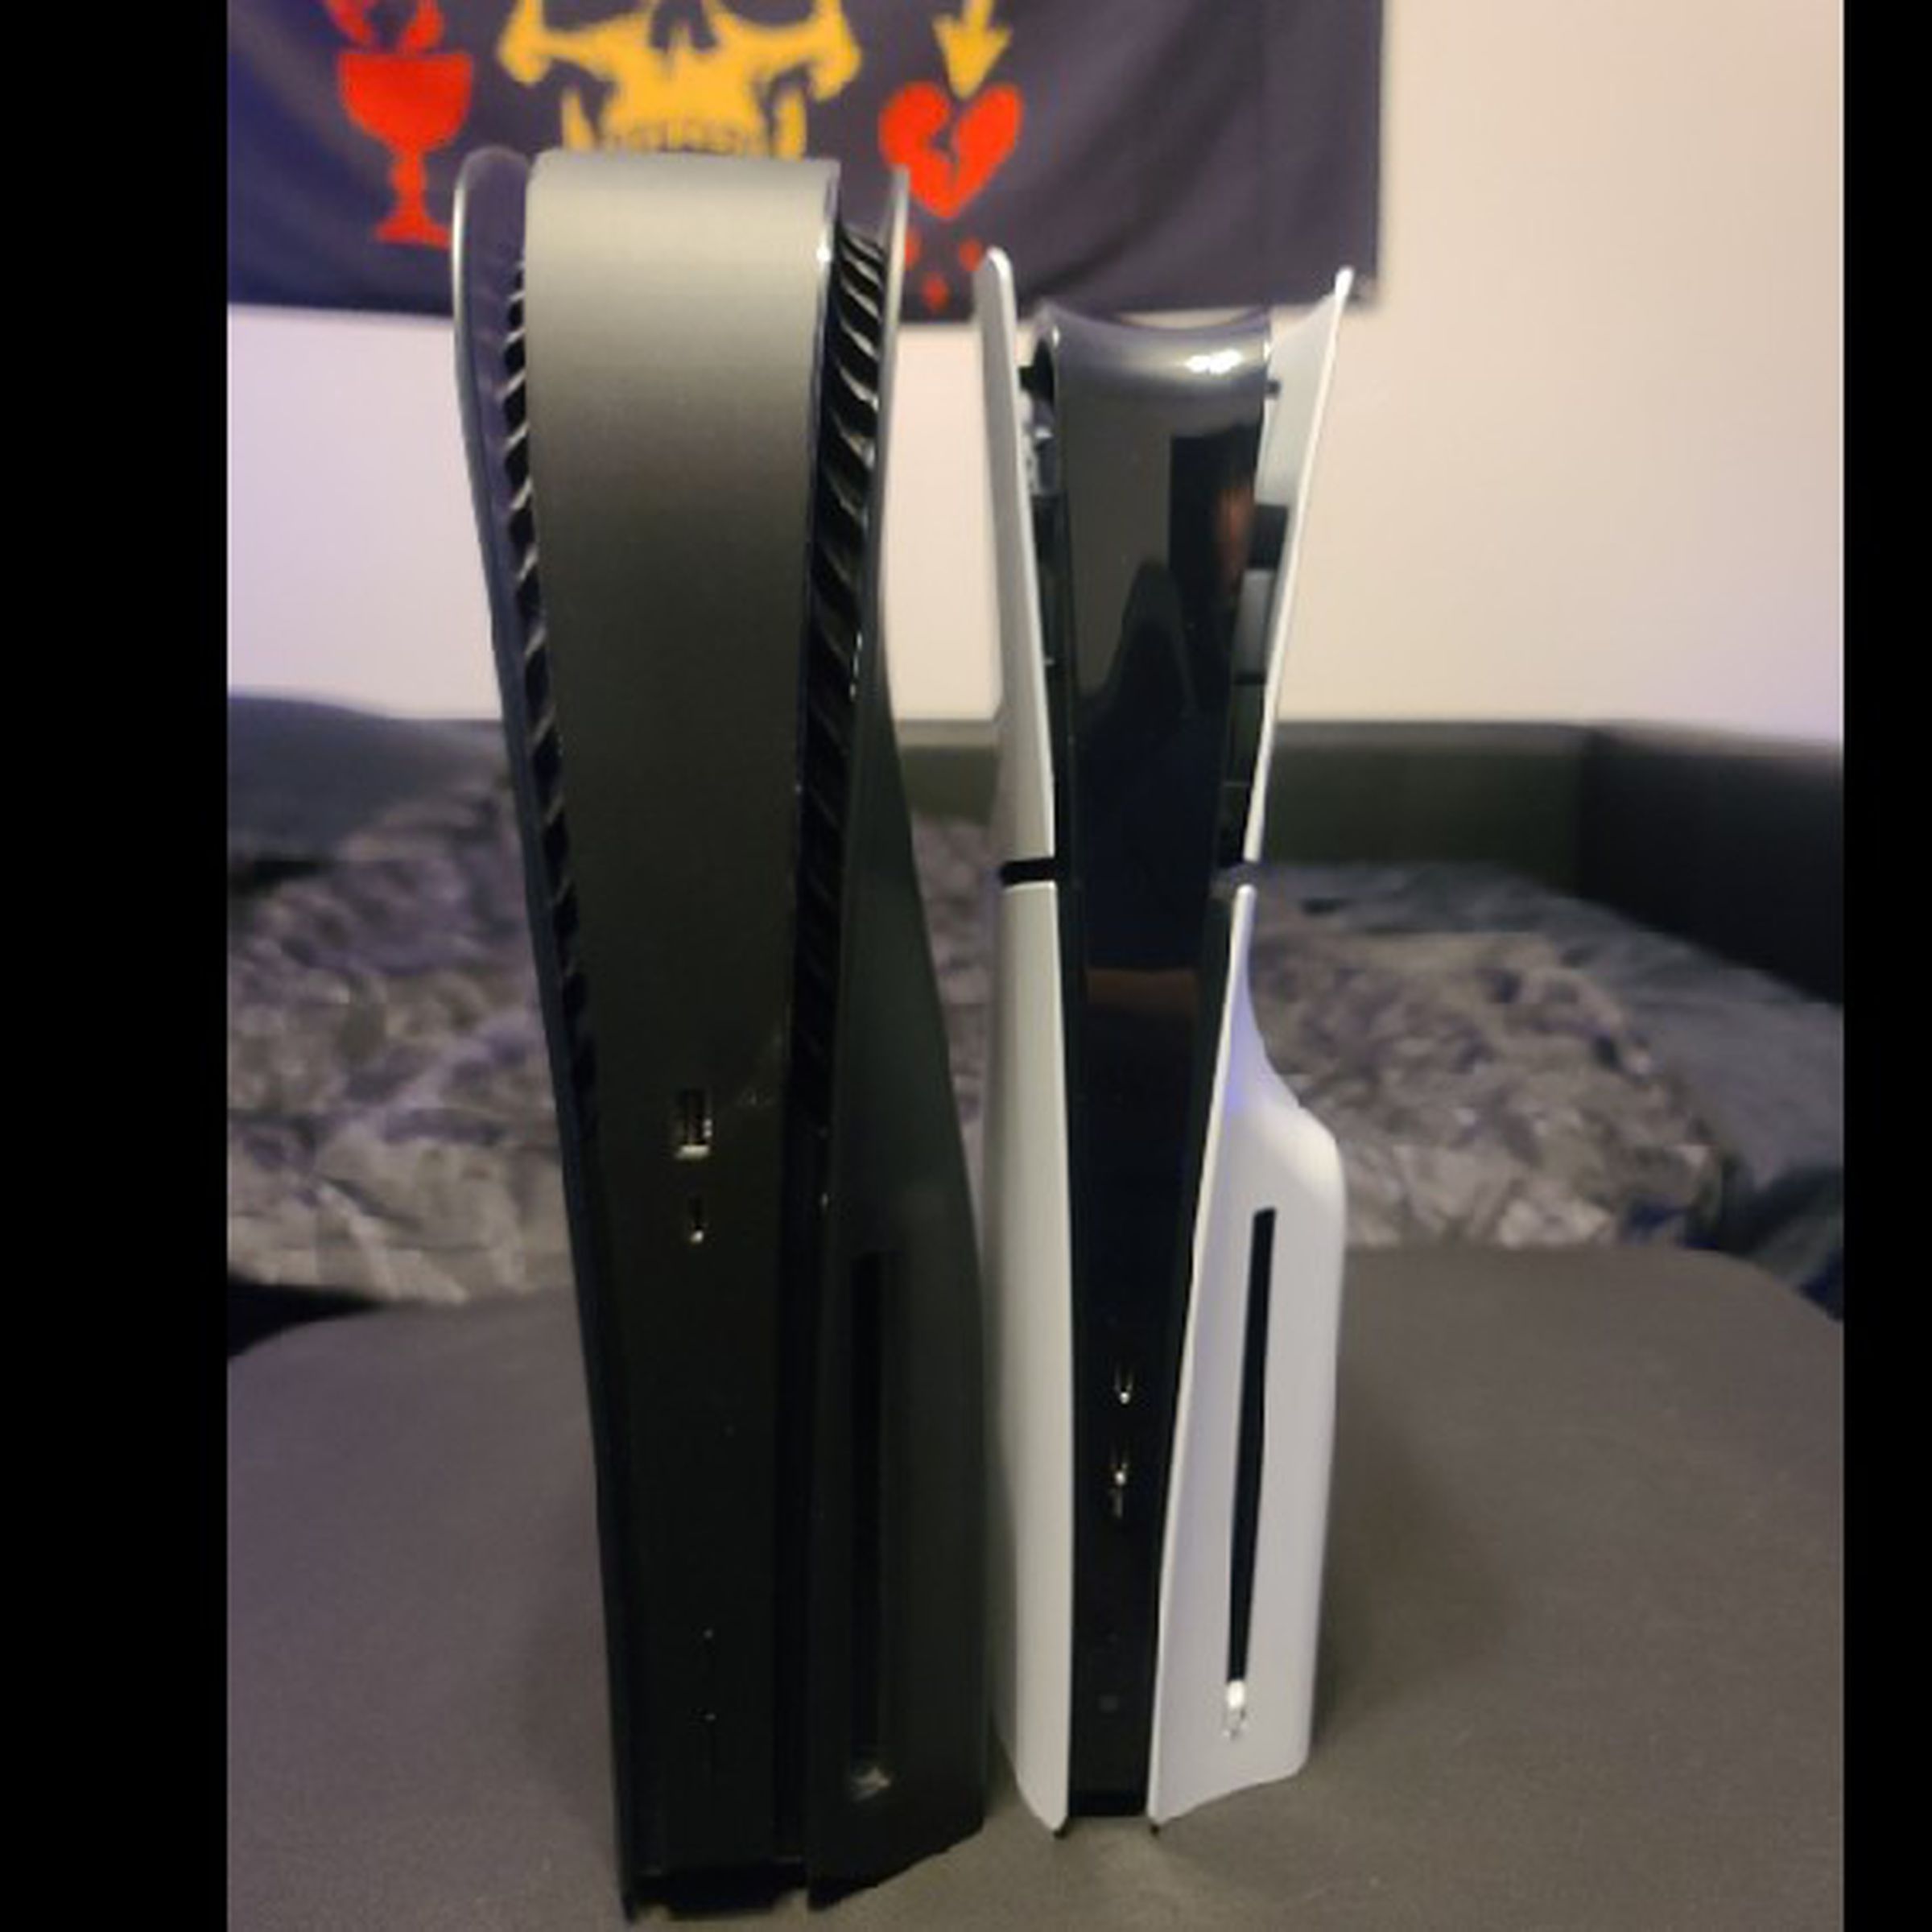 A photo showing the new PS5 next to the original